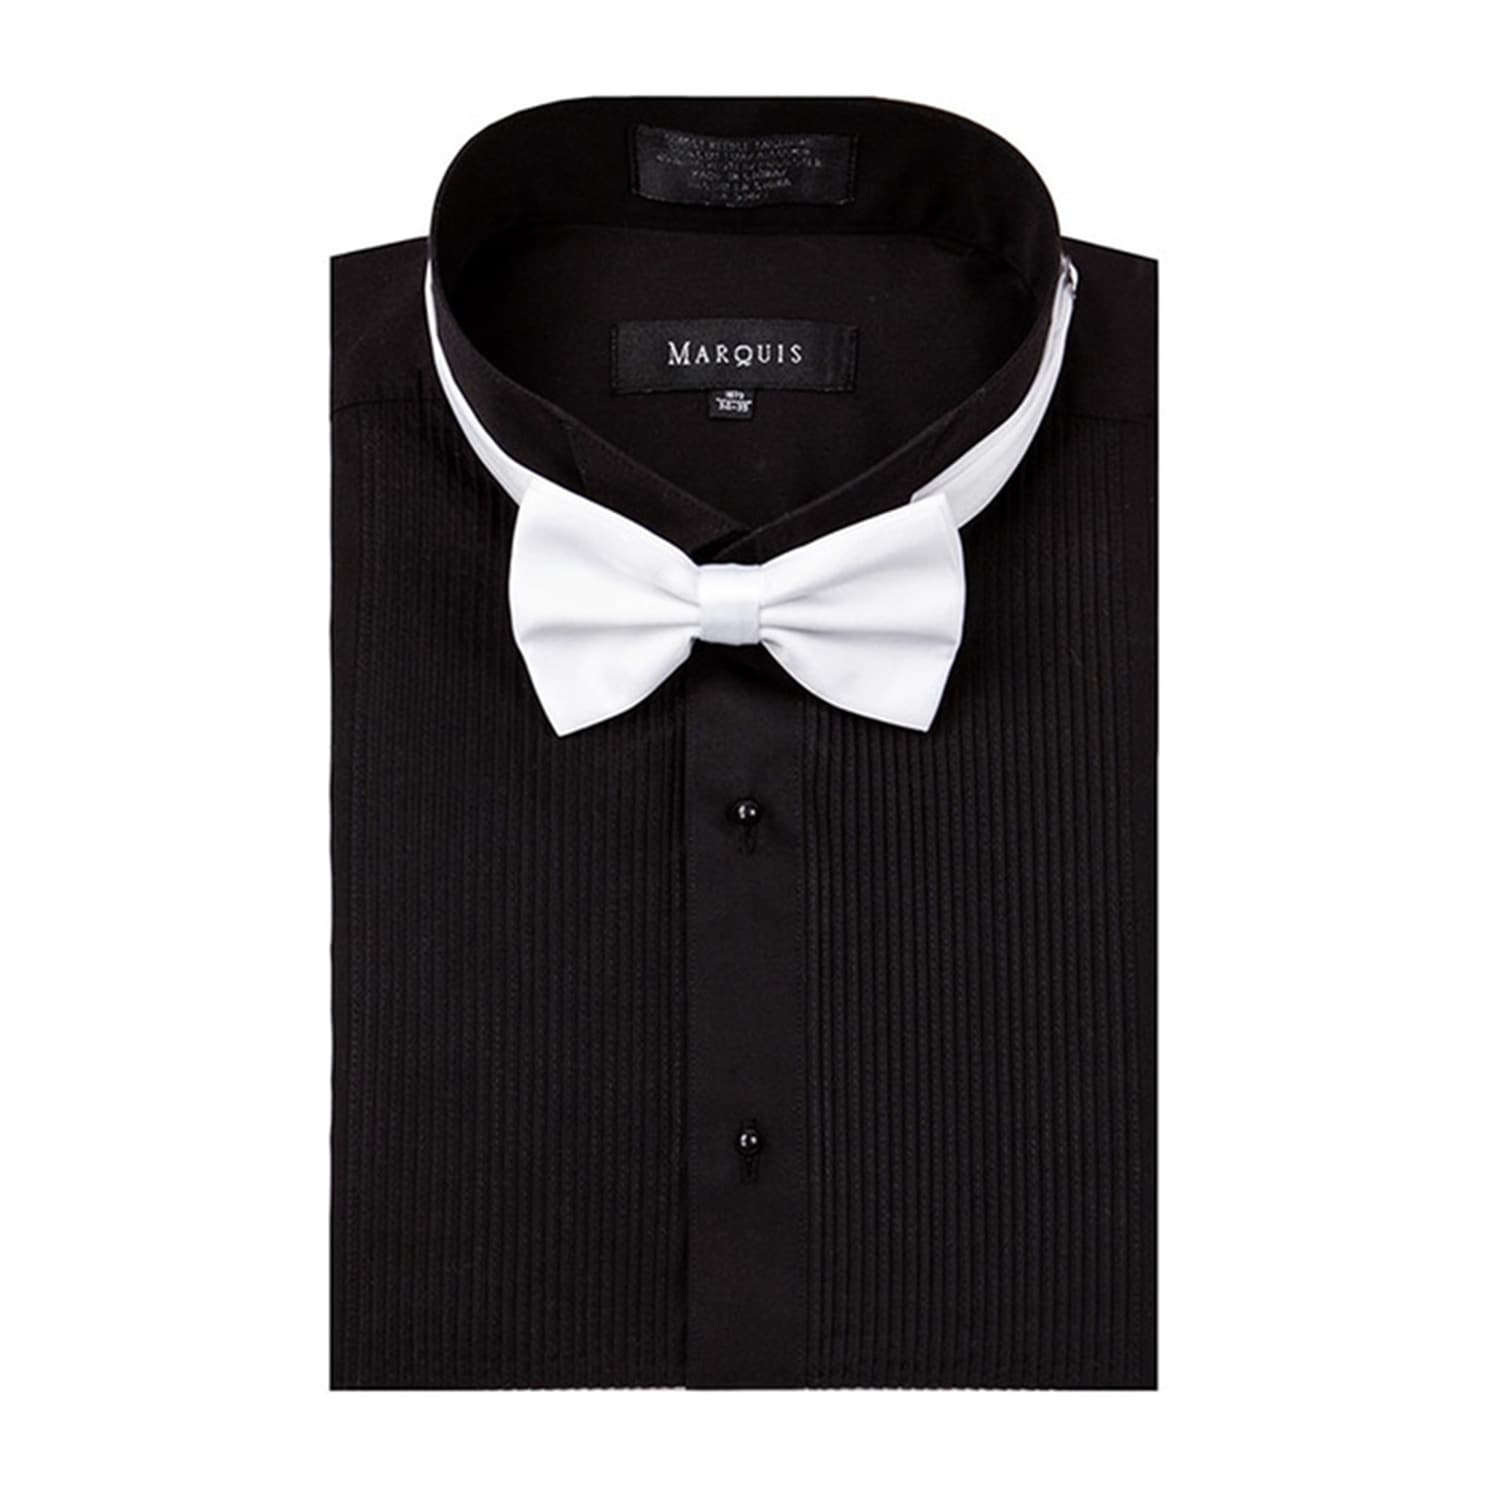 Marquis wing tip collar tuxedo dress shirt with bow tie